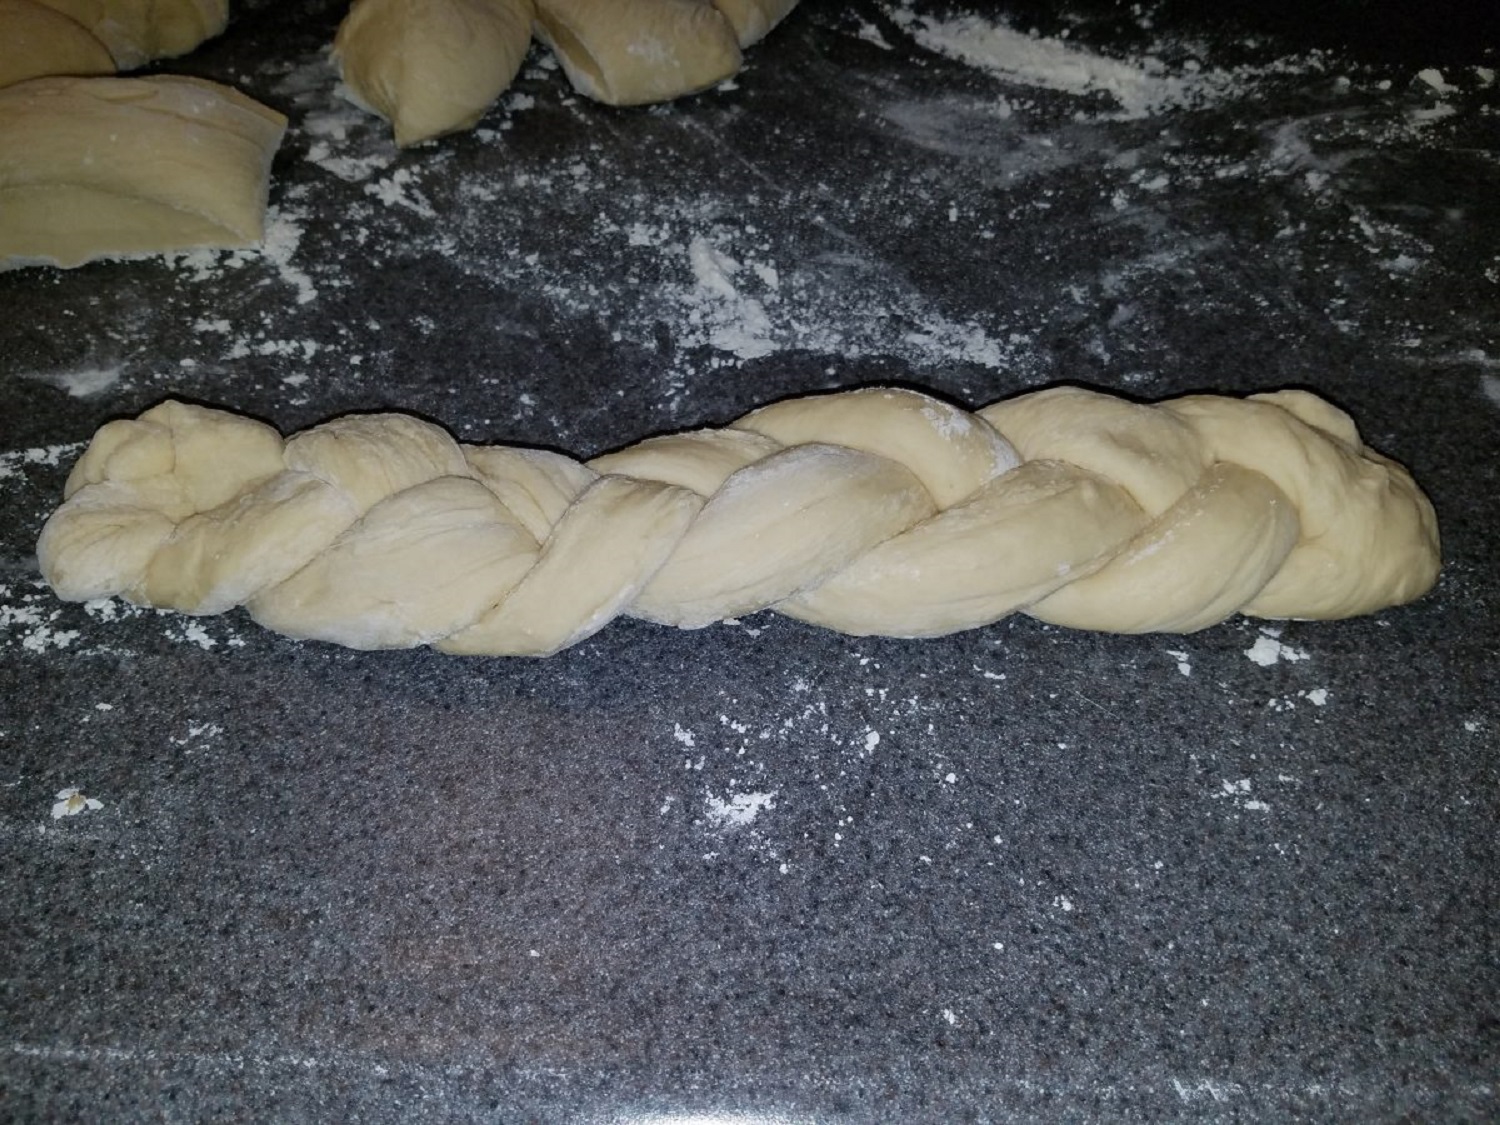 One loaf braided, two more to go